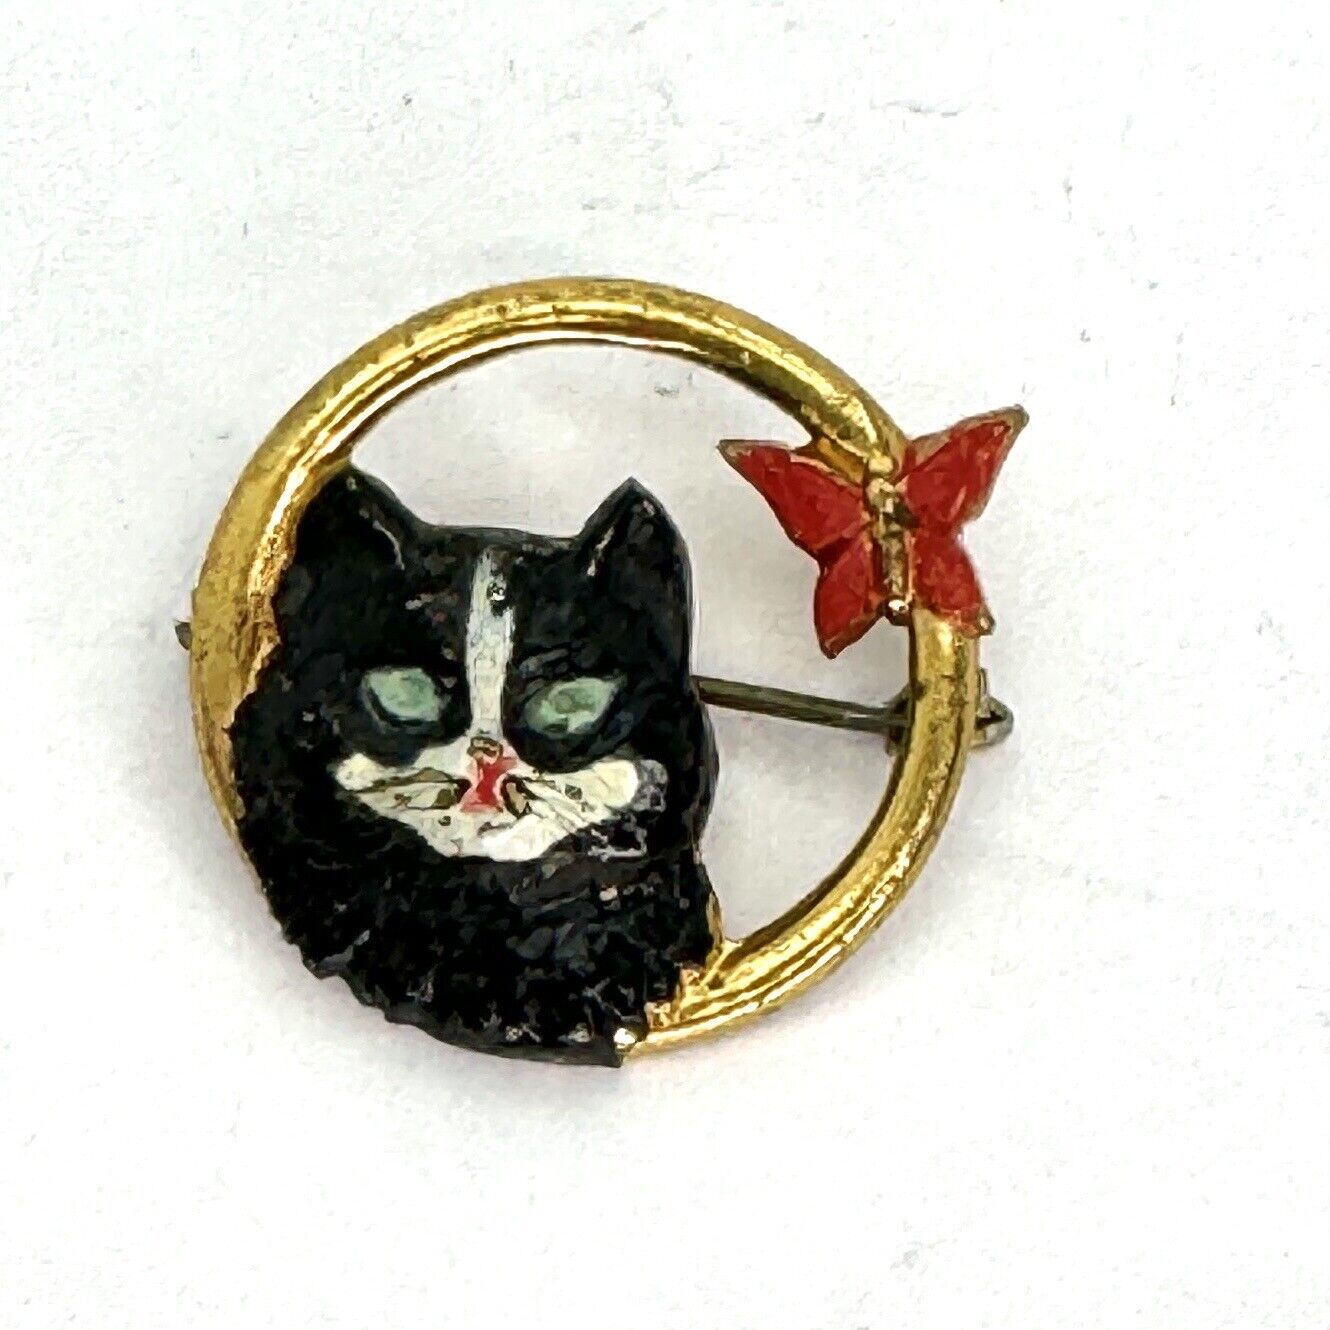 Vintage Black Enamel Black Cat With Brooch Gold Toned Red Bow